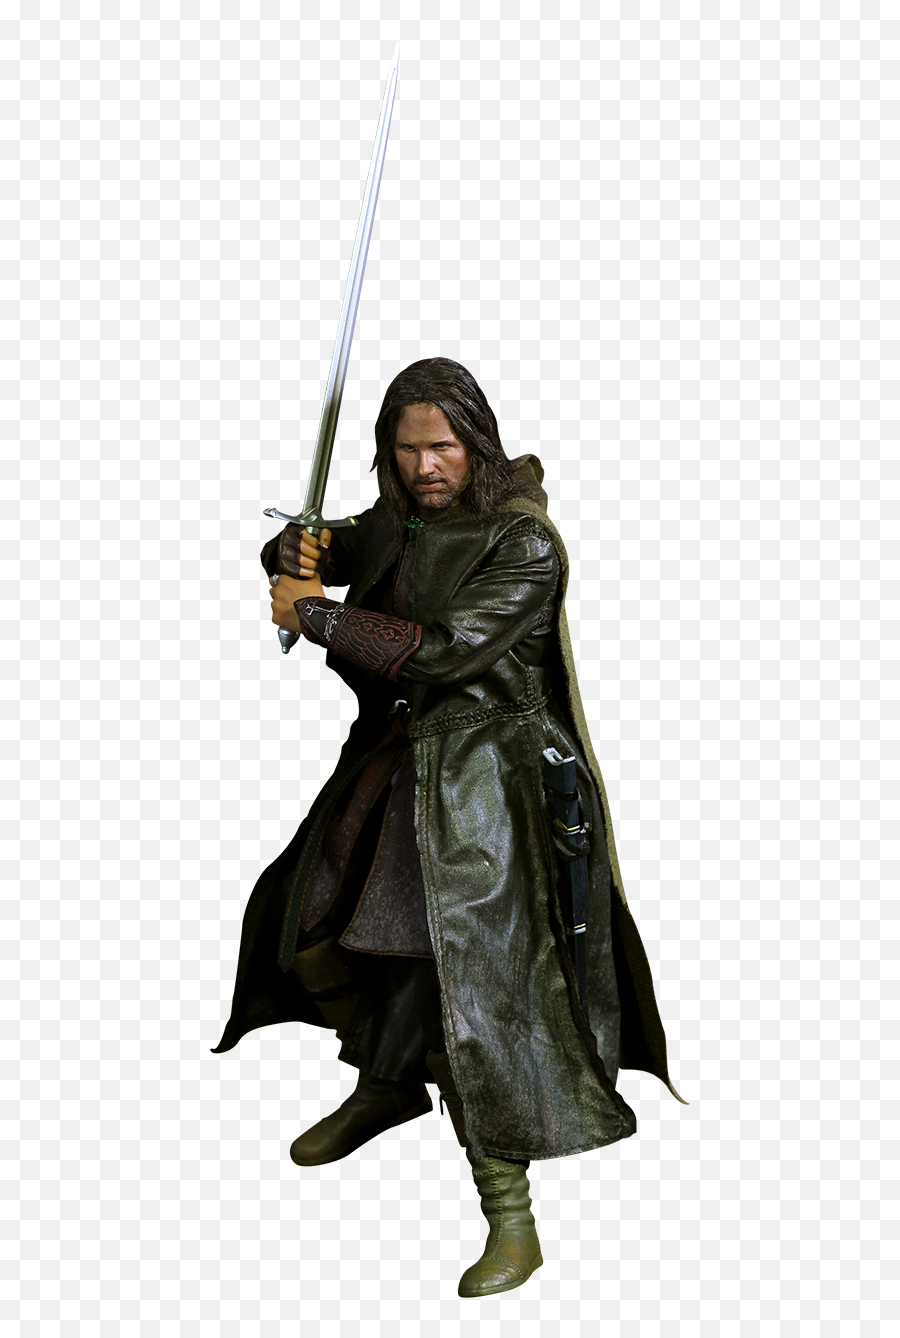 Aragorn Png U0026 Free Aragornpng Transparent Images 36054 - Pngio Aragorn Lord Of The Rings Png,The Ring Png